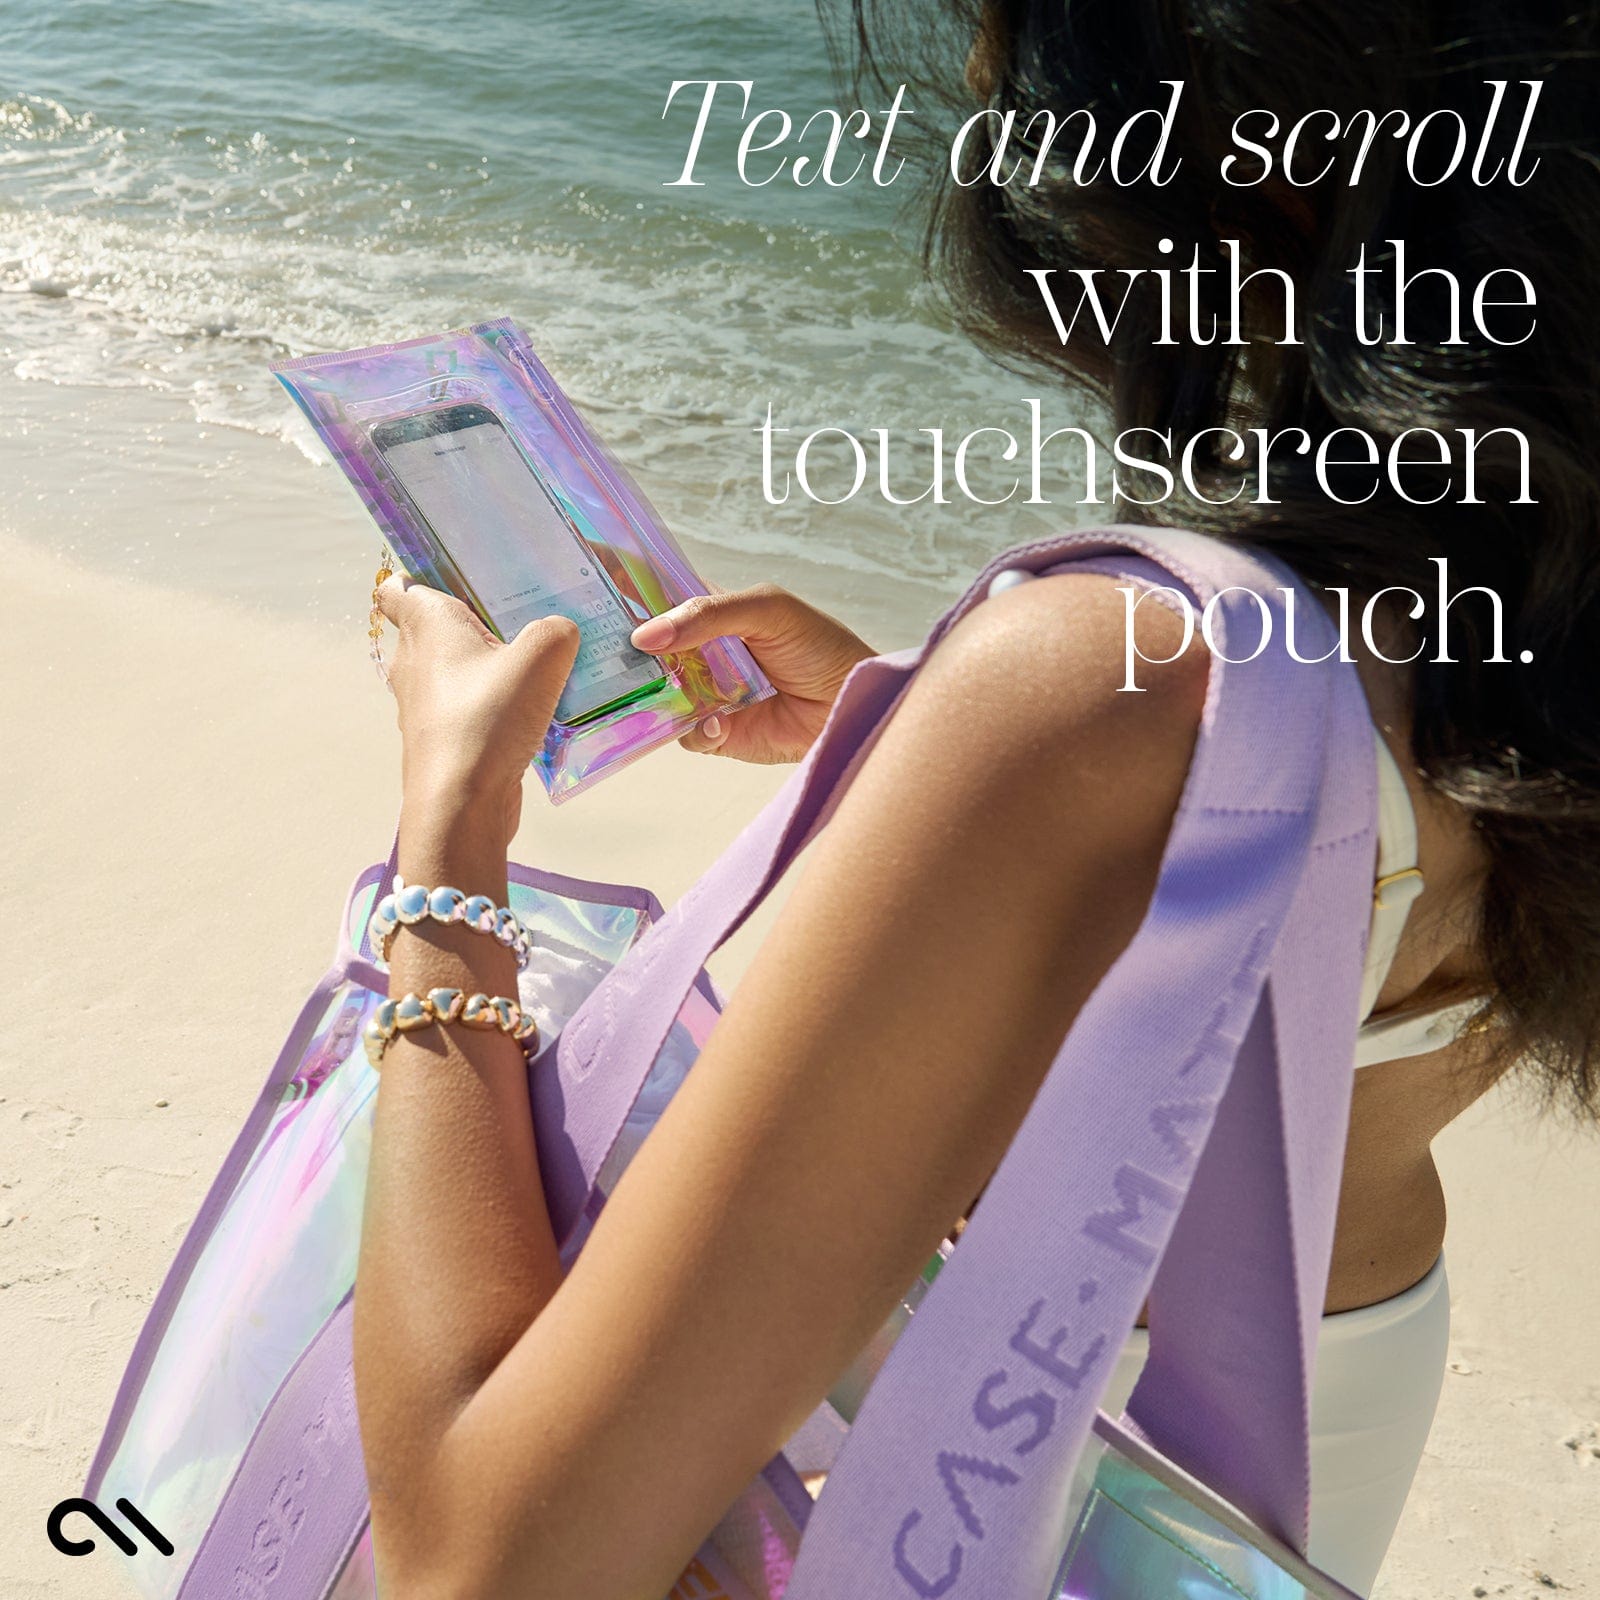 TEXT AND SCROLL WITH THE TOUCHSCREEN PHONE POUCH